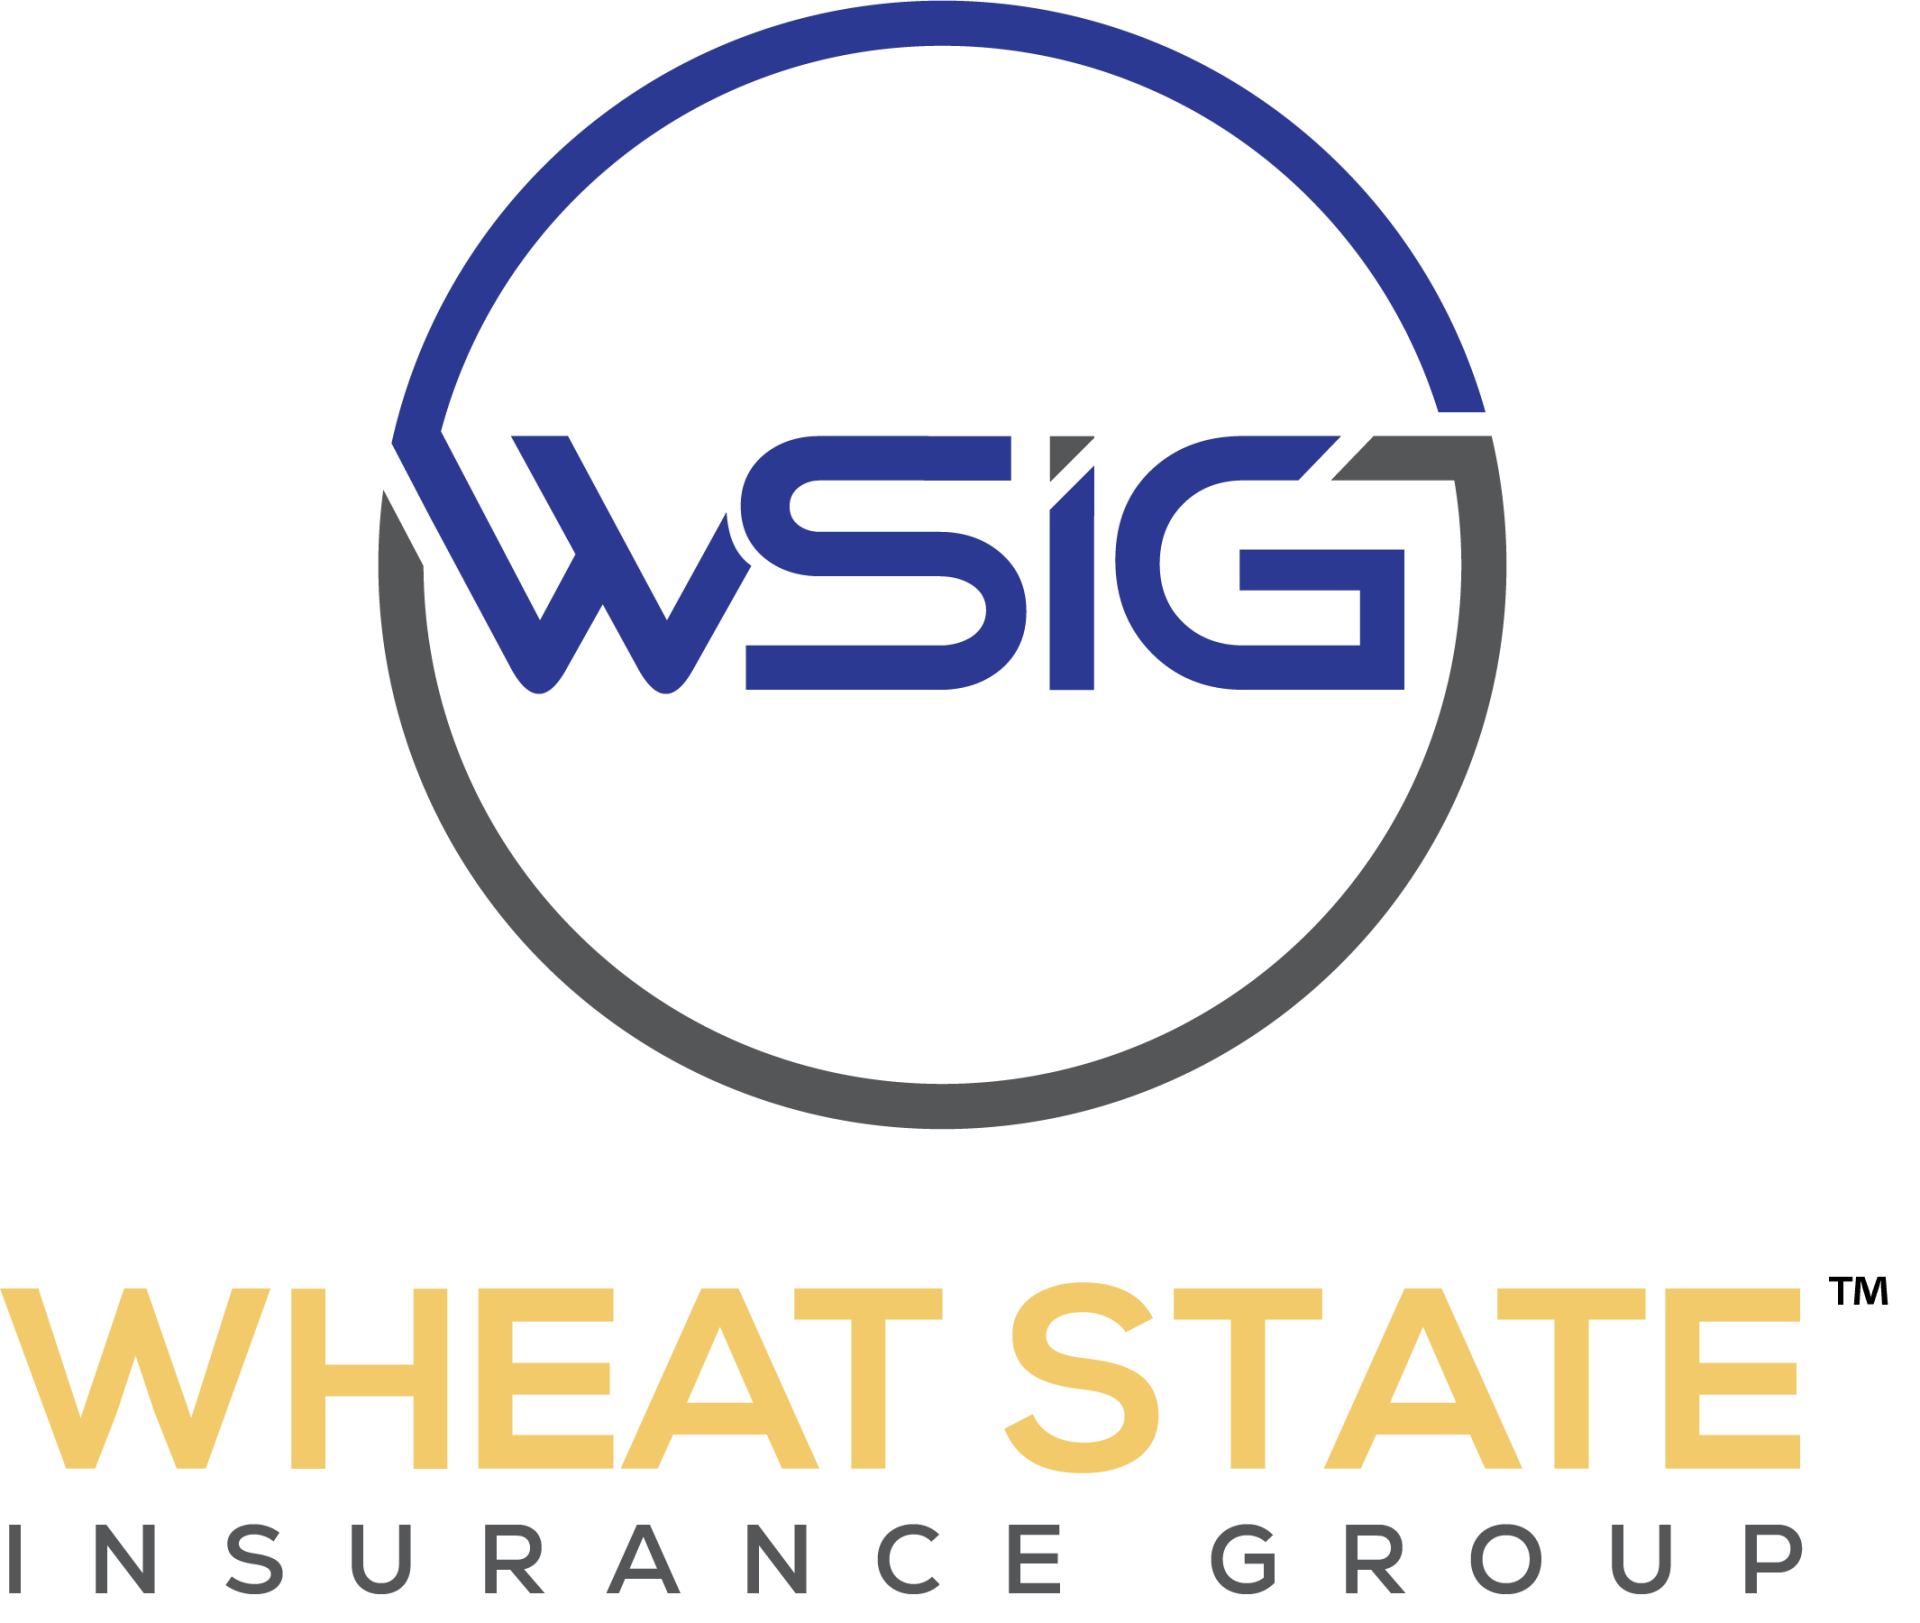 The logo for wheat state insurance group is a blue and gray circle.